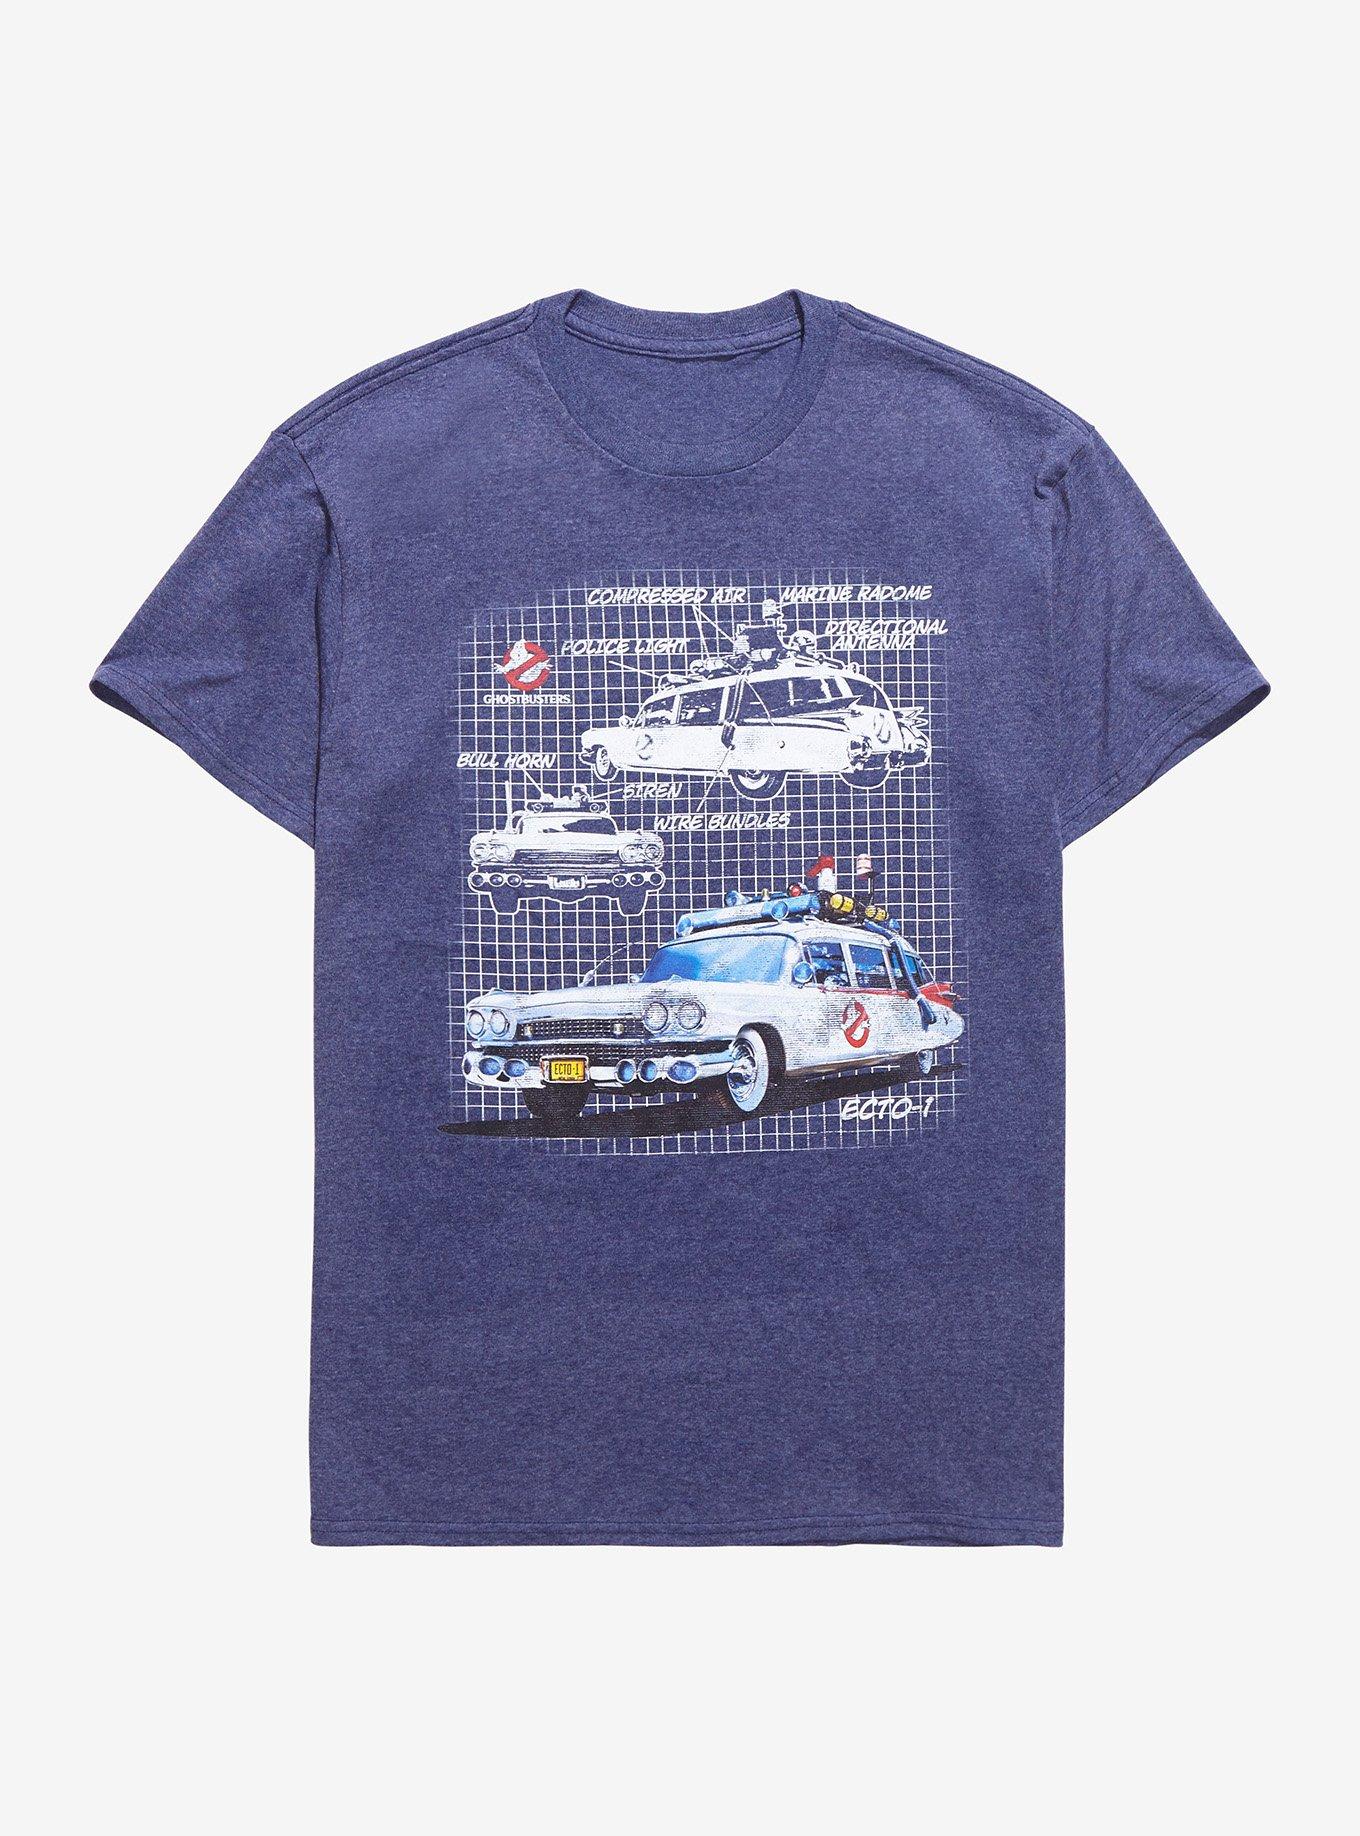 Ghostbusters: Afterlife Ecto-1 T-Shirt, BLUE, hi-res